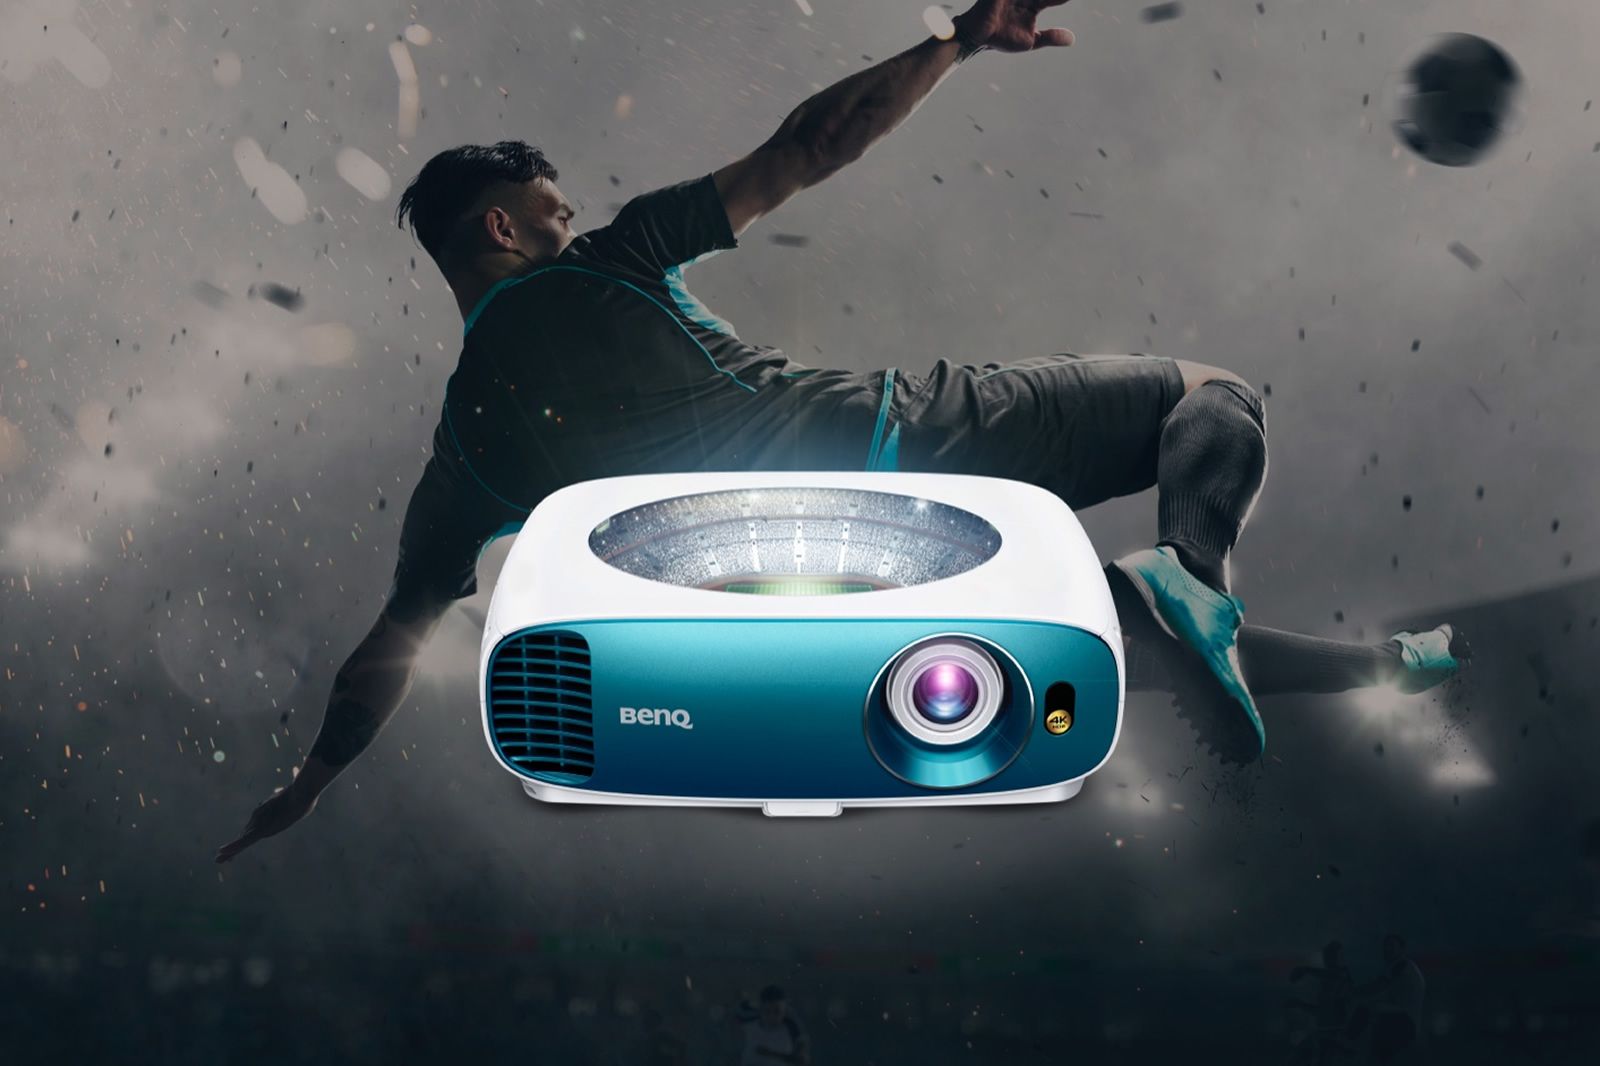 How To Watch The Football Outside With The Benq Tk800 image 1